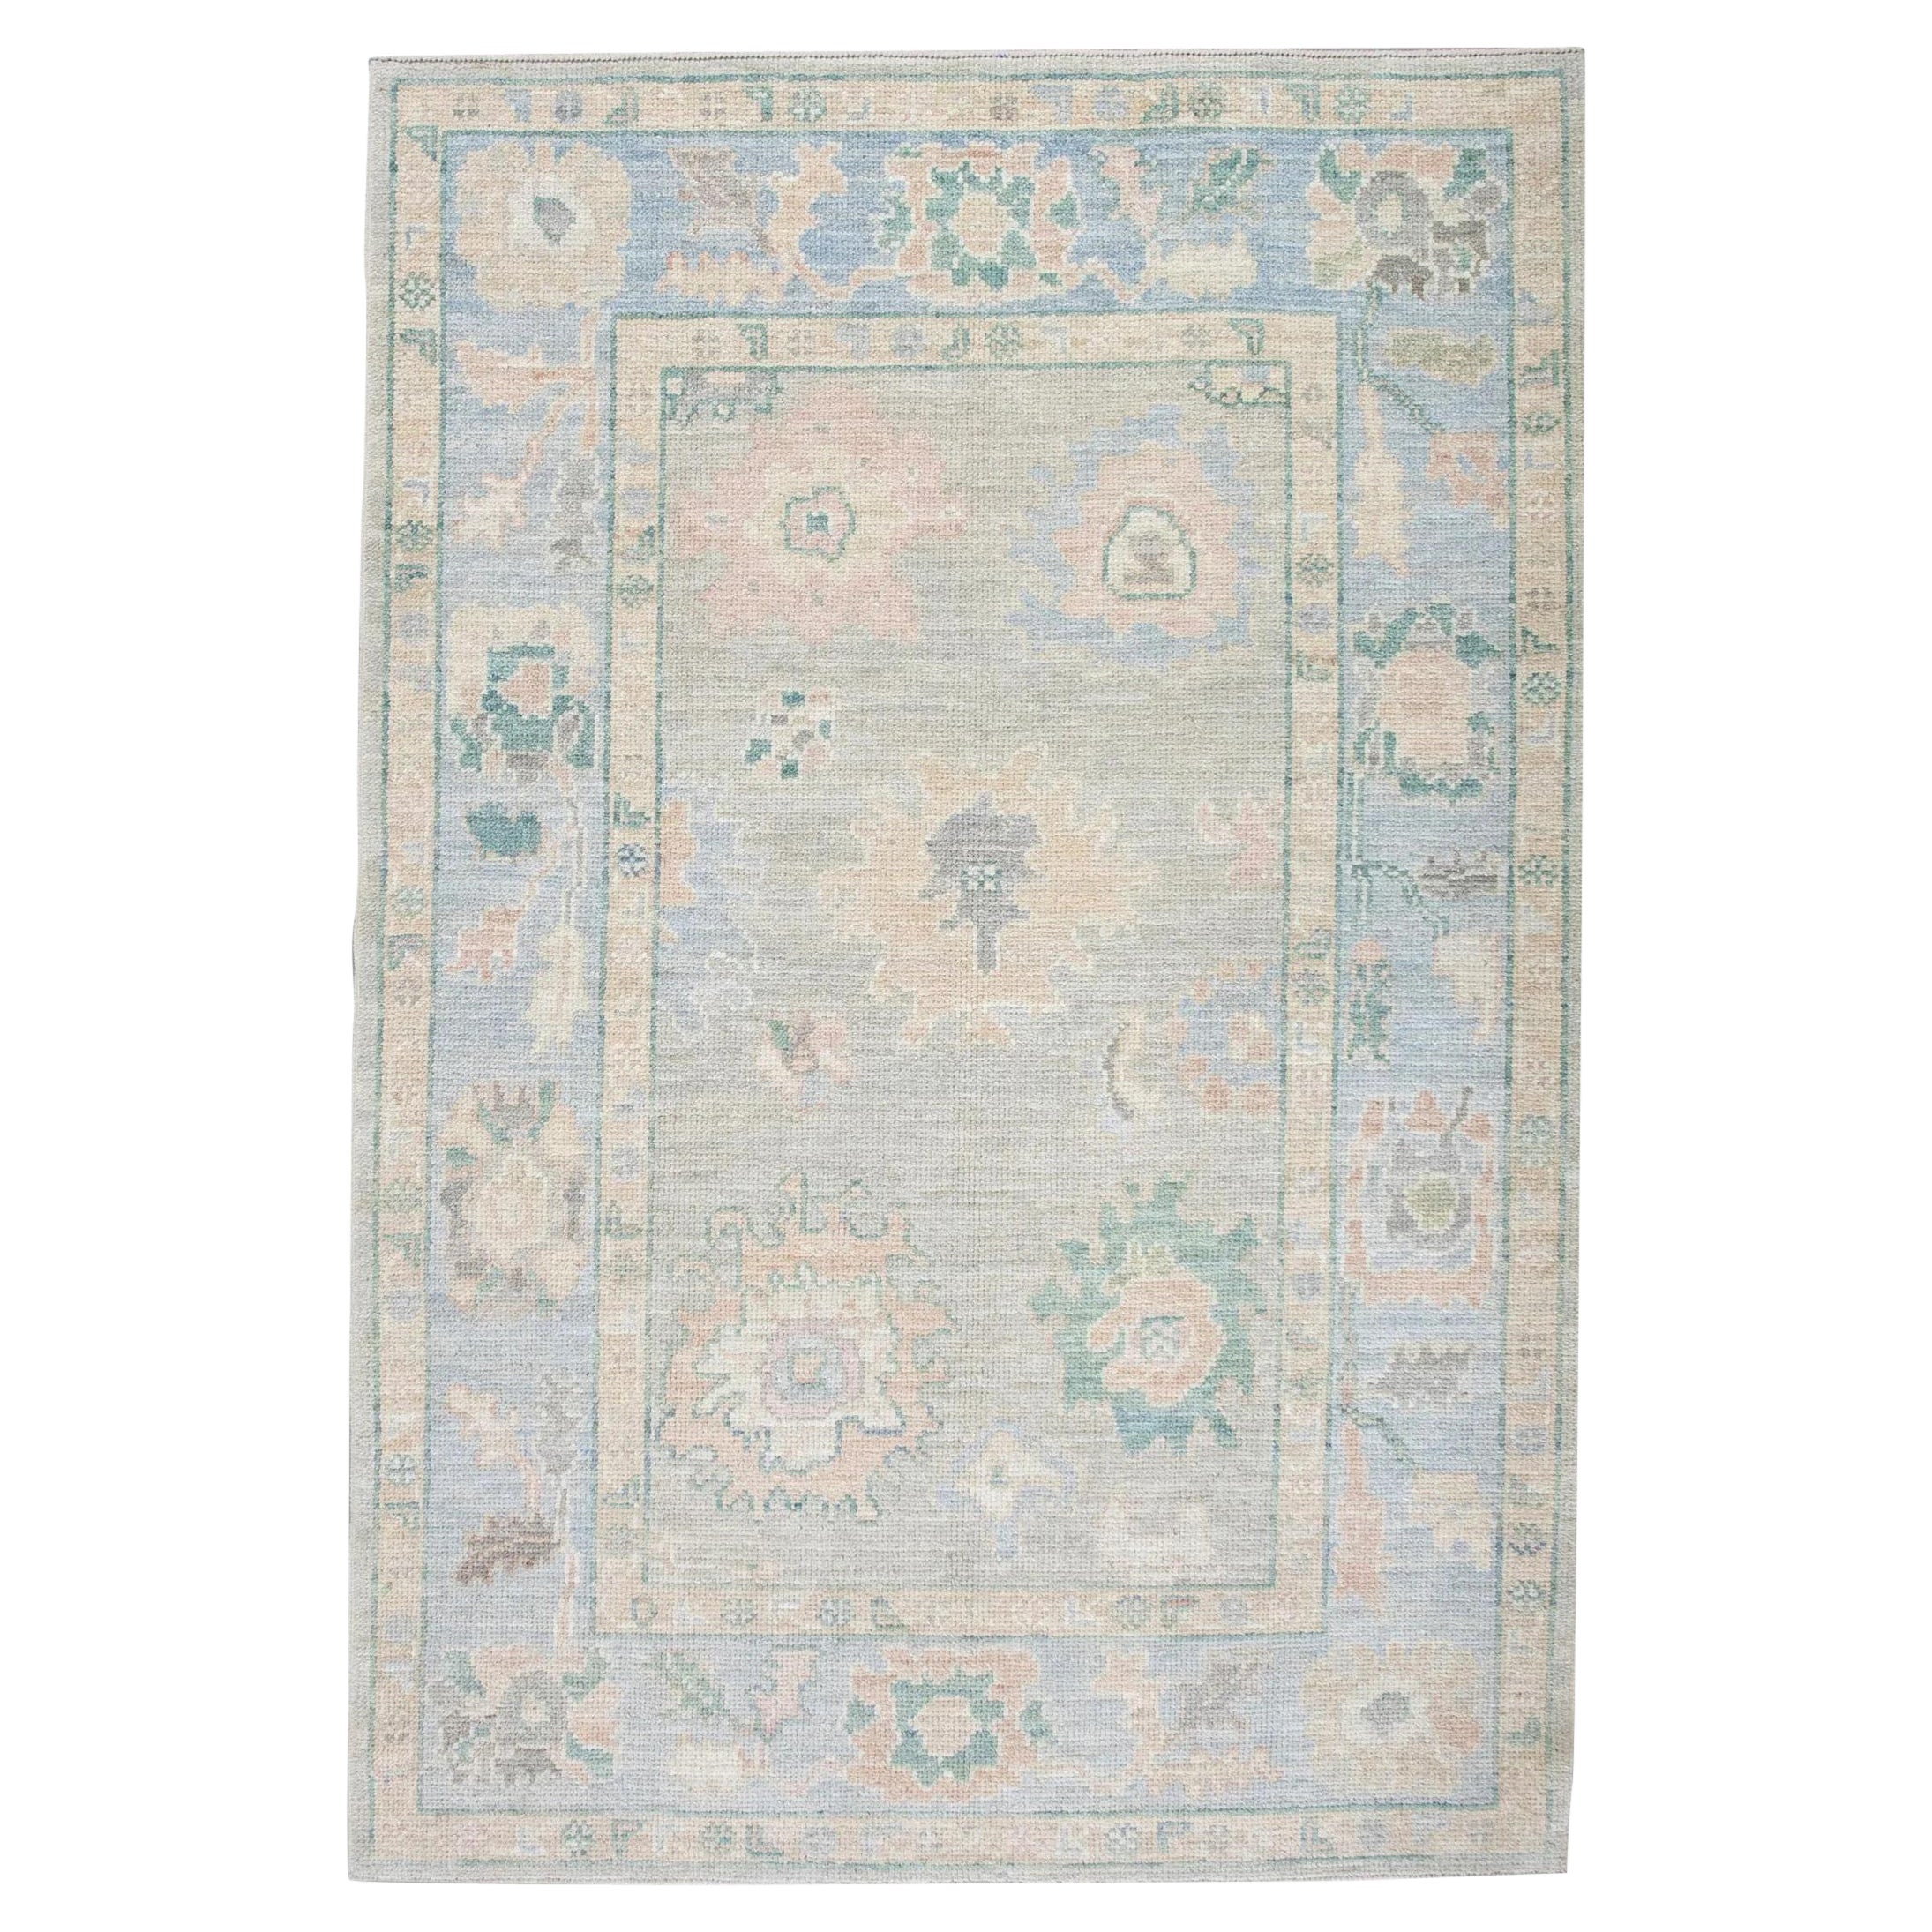 Multicolor Floral Pattern Handwoven Wool Turkish Oushak Rug 4'1" x 6'1"